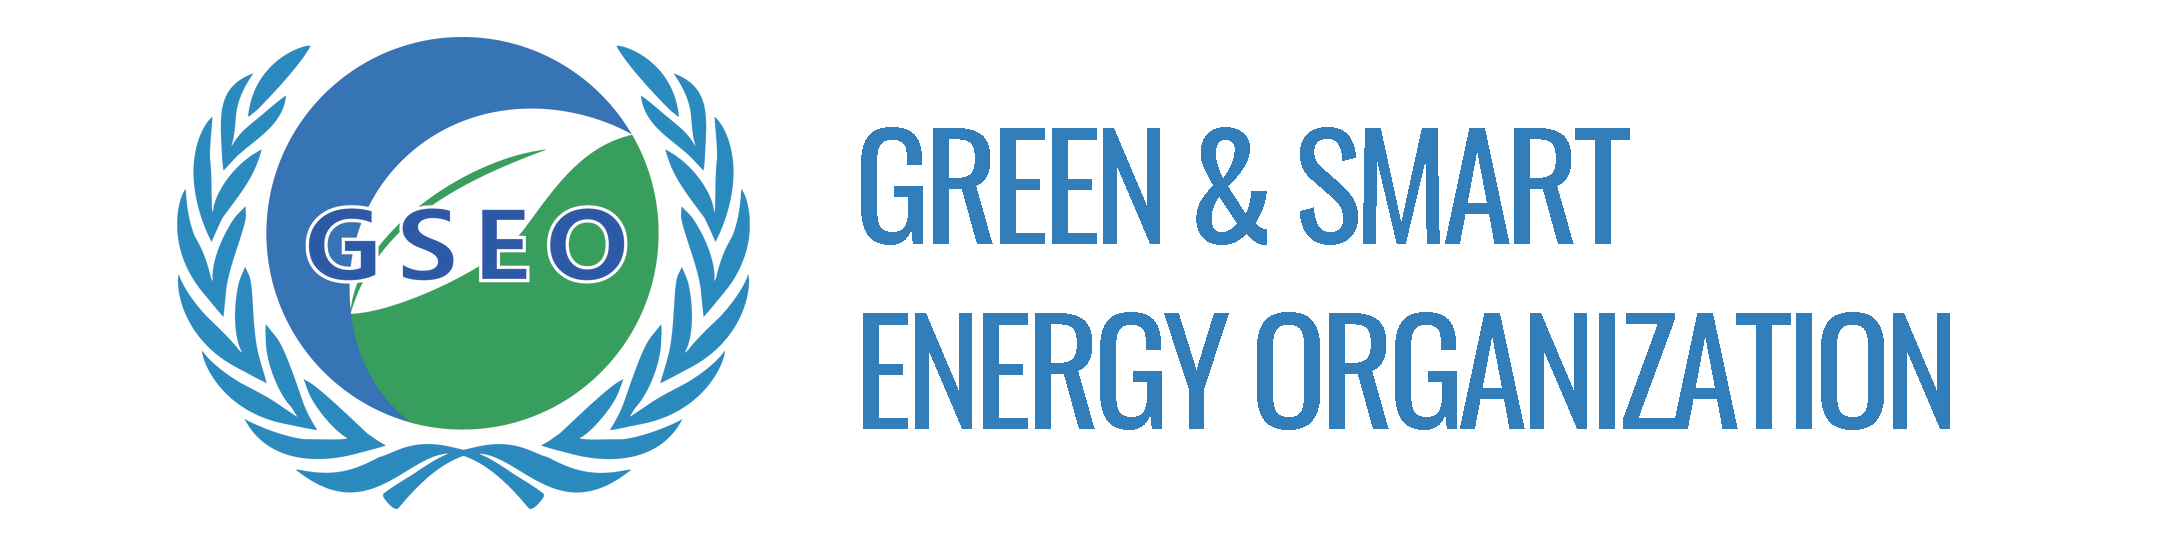 Green and Smart Energy Organization